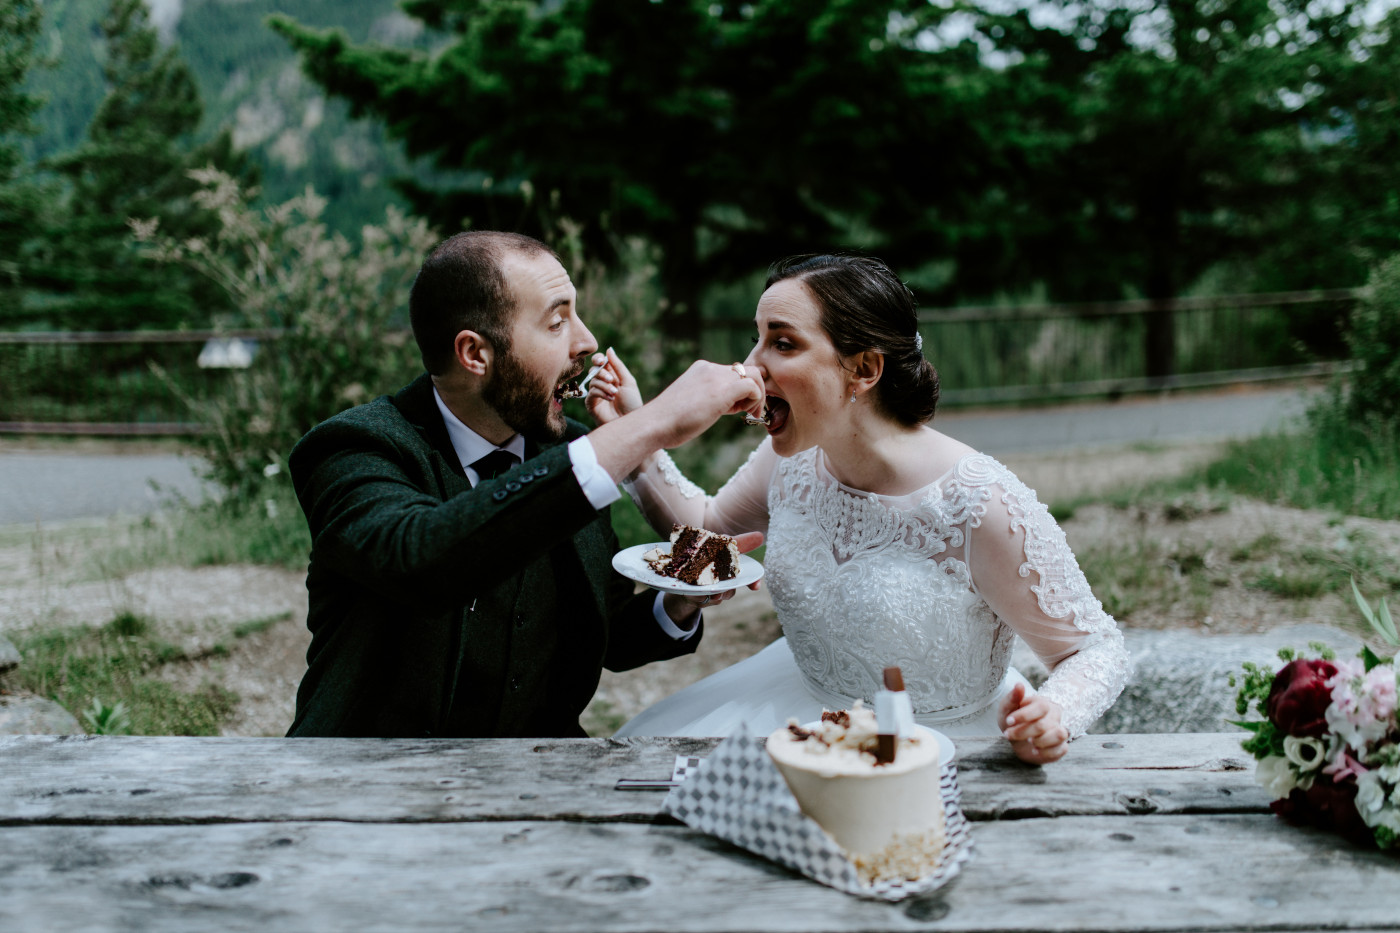 Alex and Elizabeth hold hands while cutting their cake. Elopement photography at North Cascades National Park by Sienna Plus Josh.